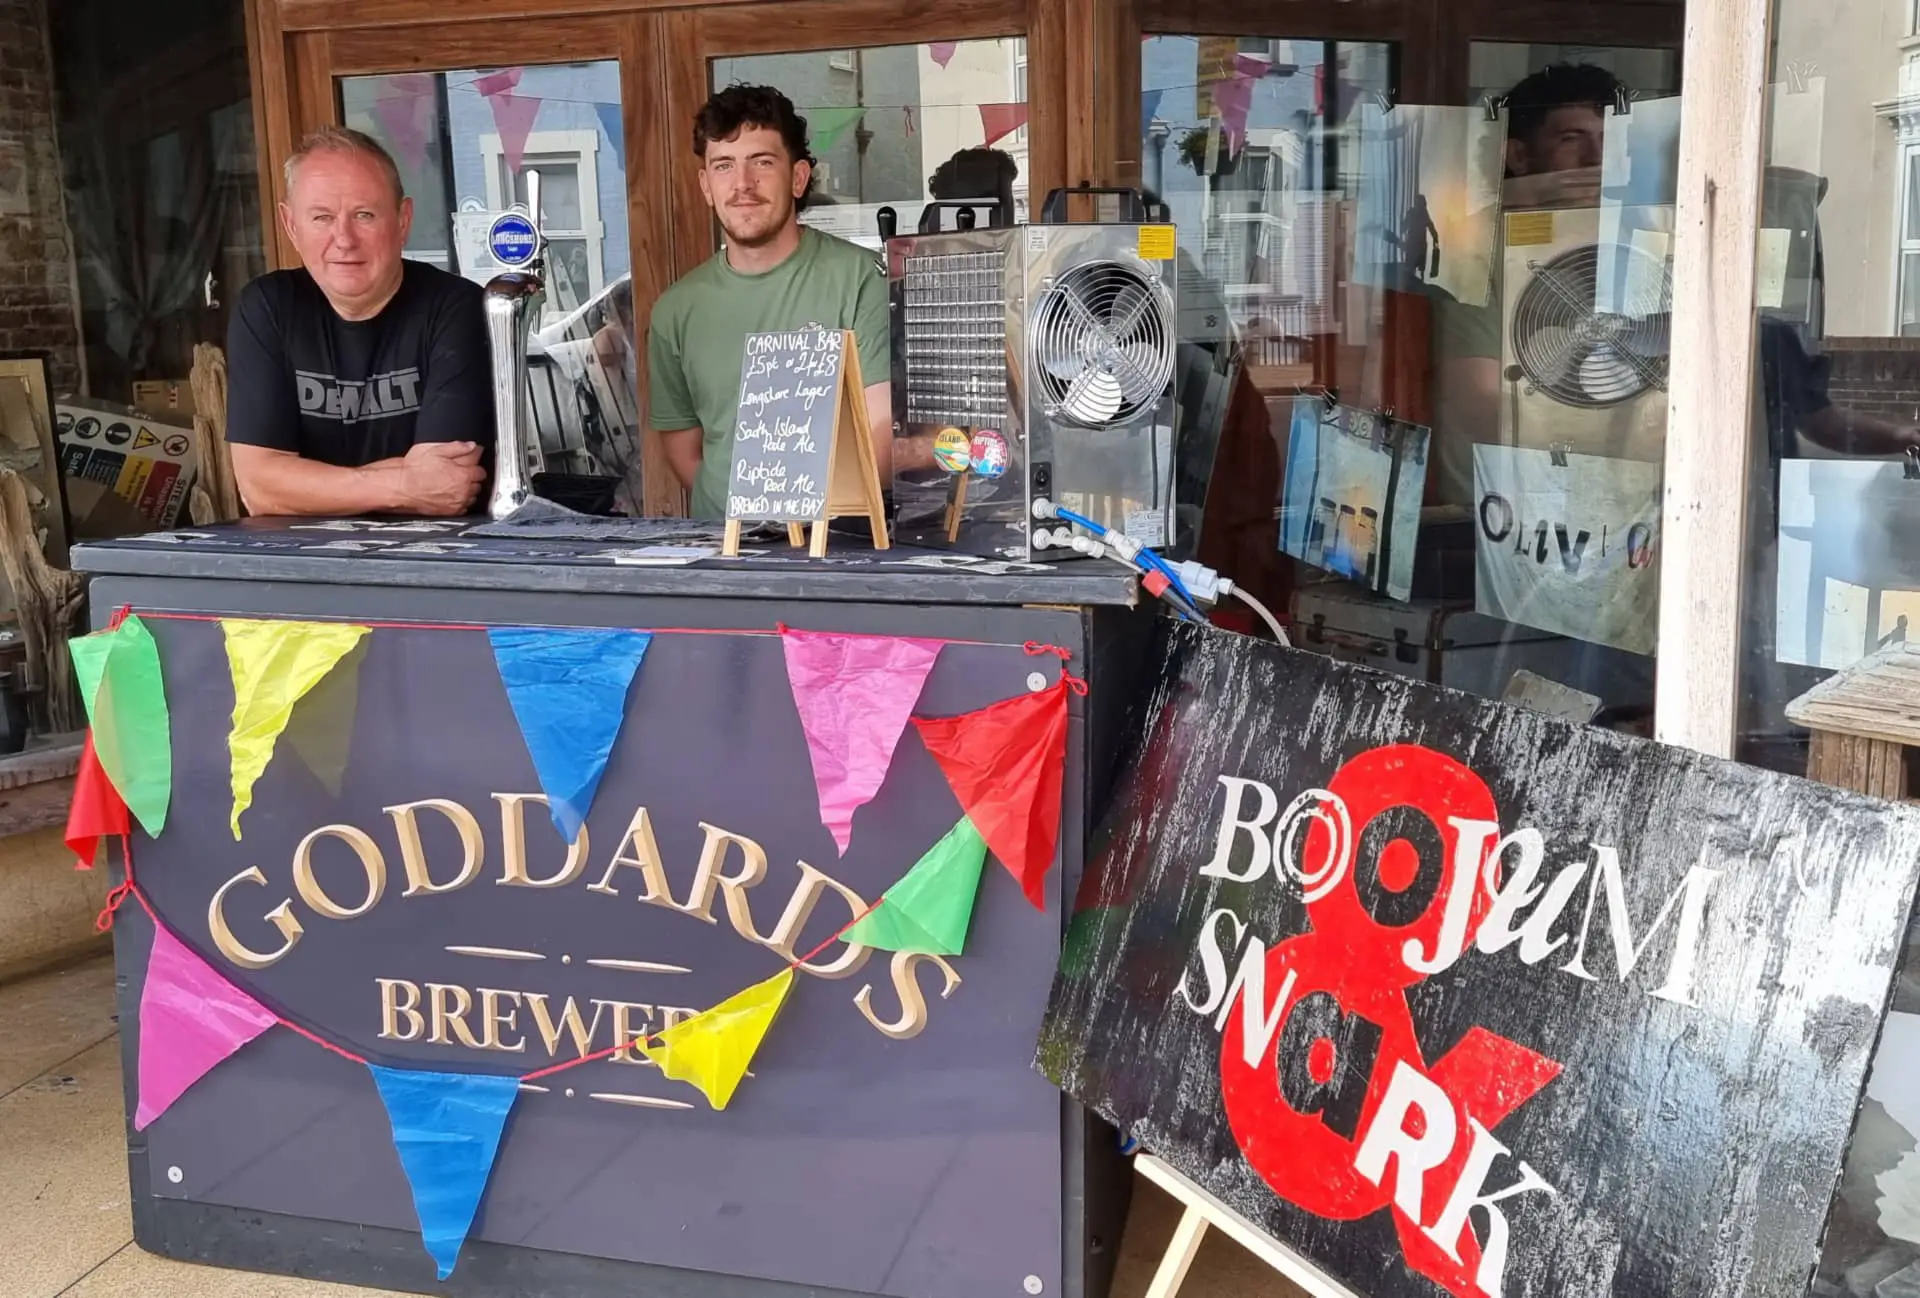 Goddard's Beer Stand at Boojum and Snark